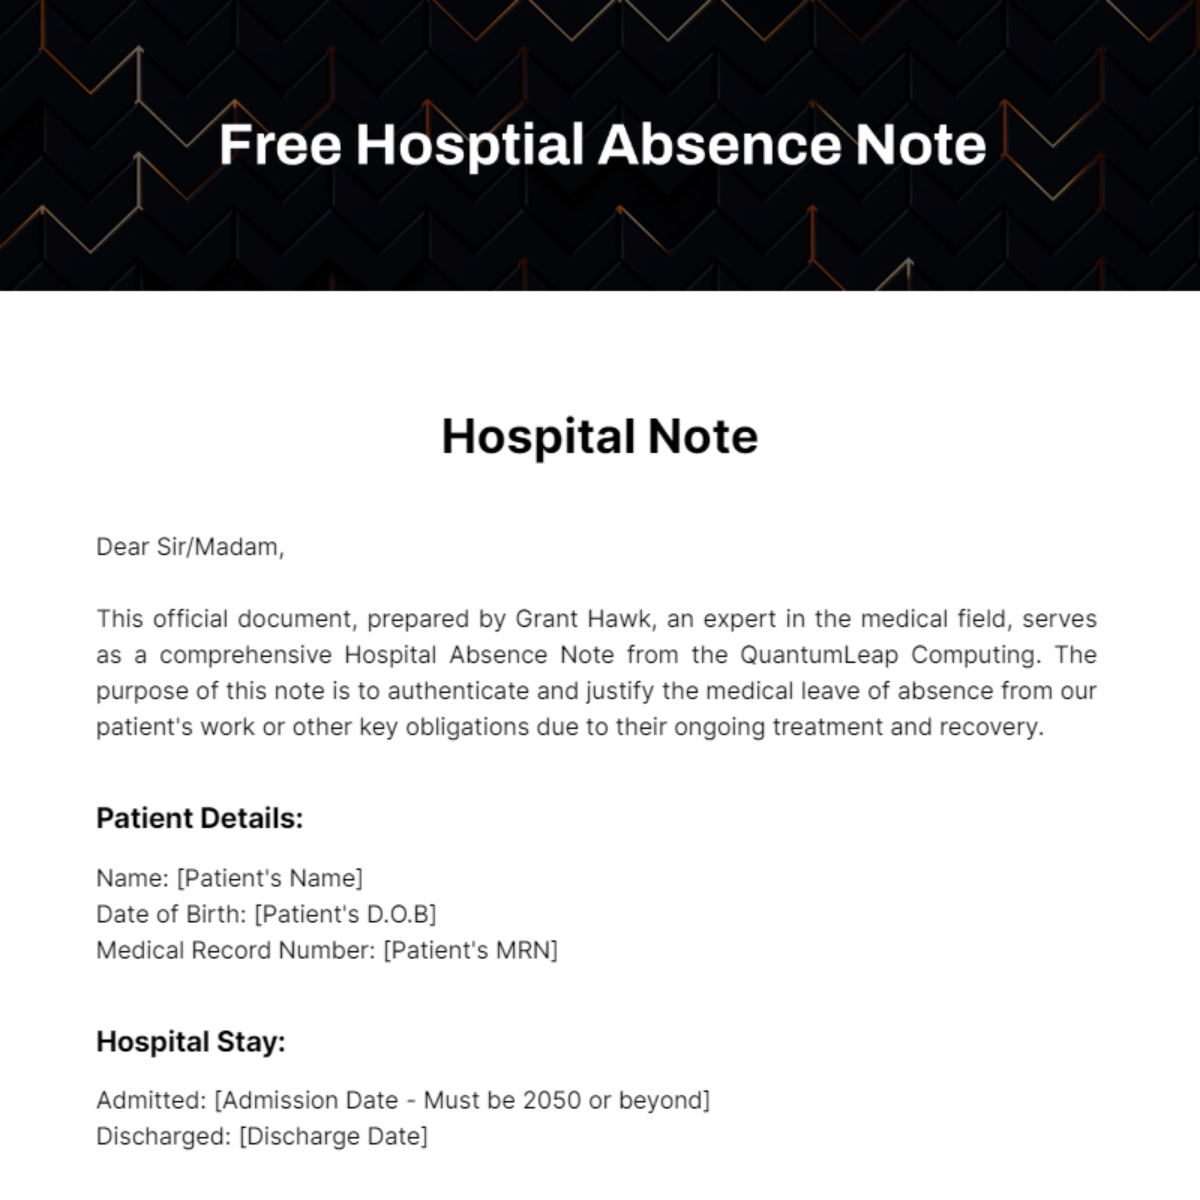 Hosptial Absence Note Template